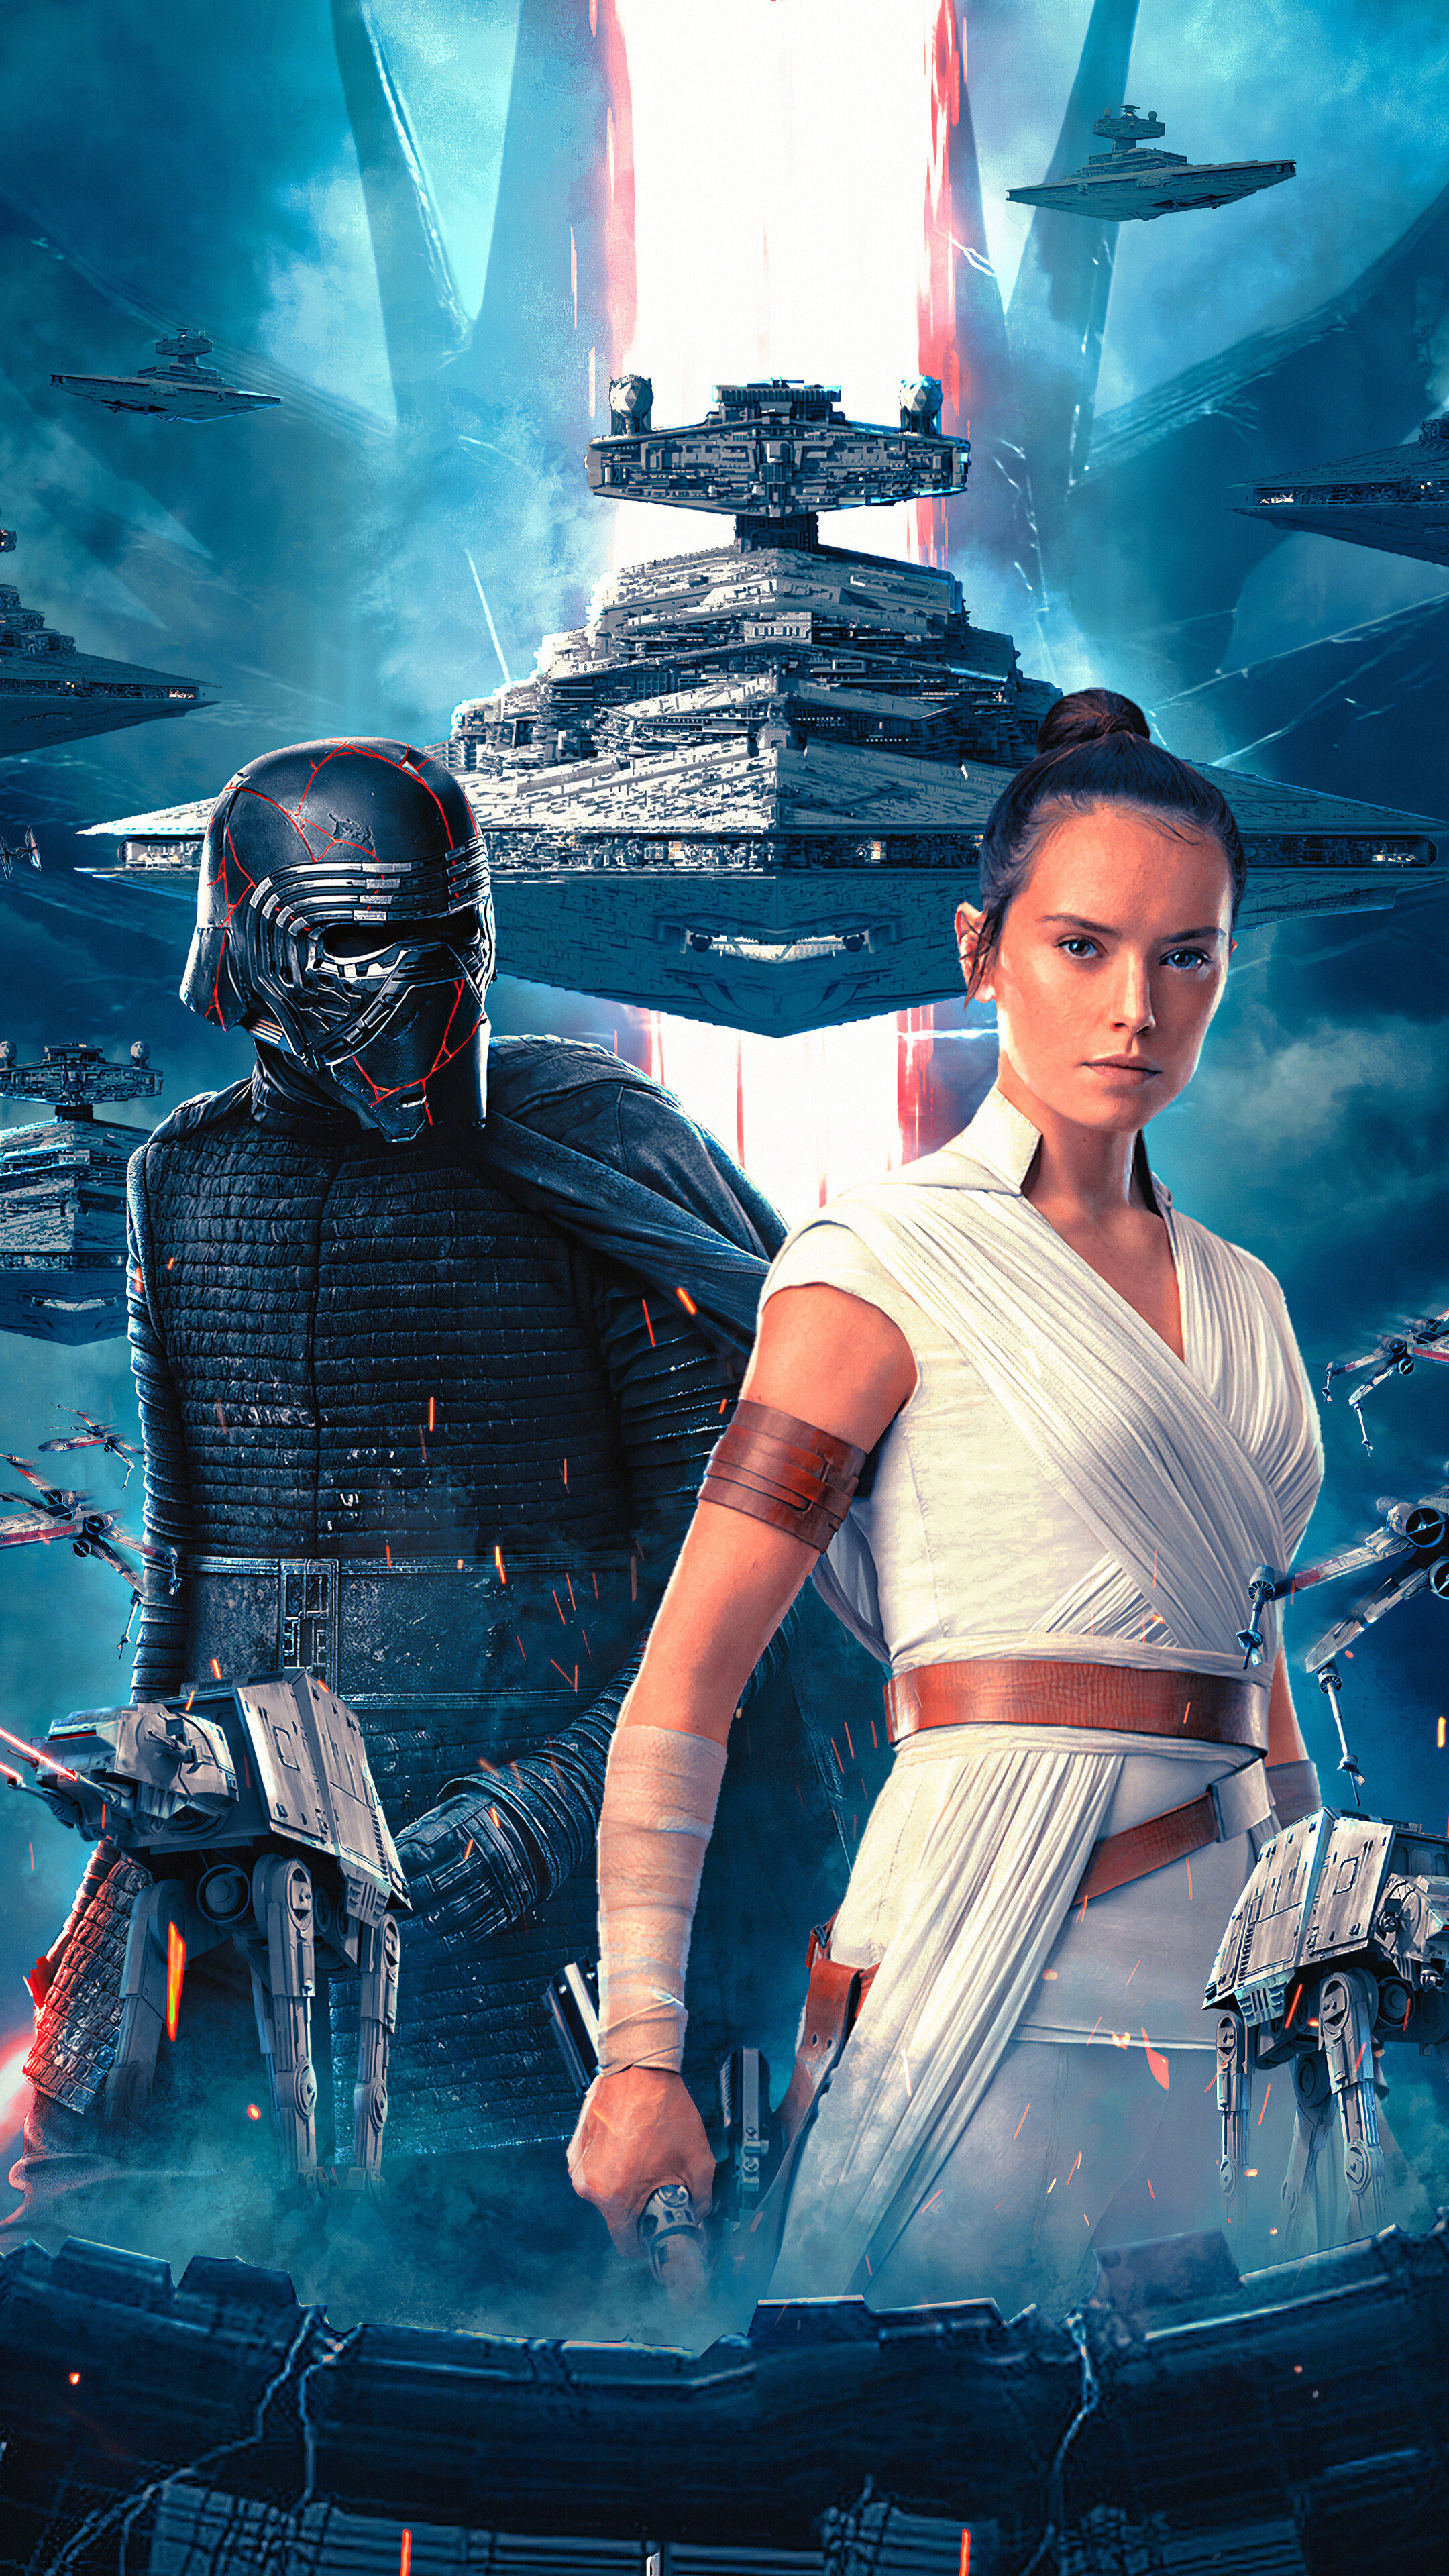 Star Wars: The Rise Of Skywalker: Rey and Kylo Ren, The film was released in the United States on December 20, 2019. 2160x3840 4K Wallpaper.